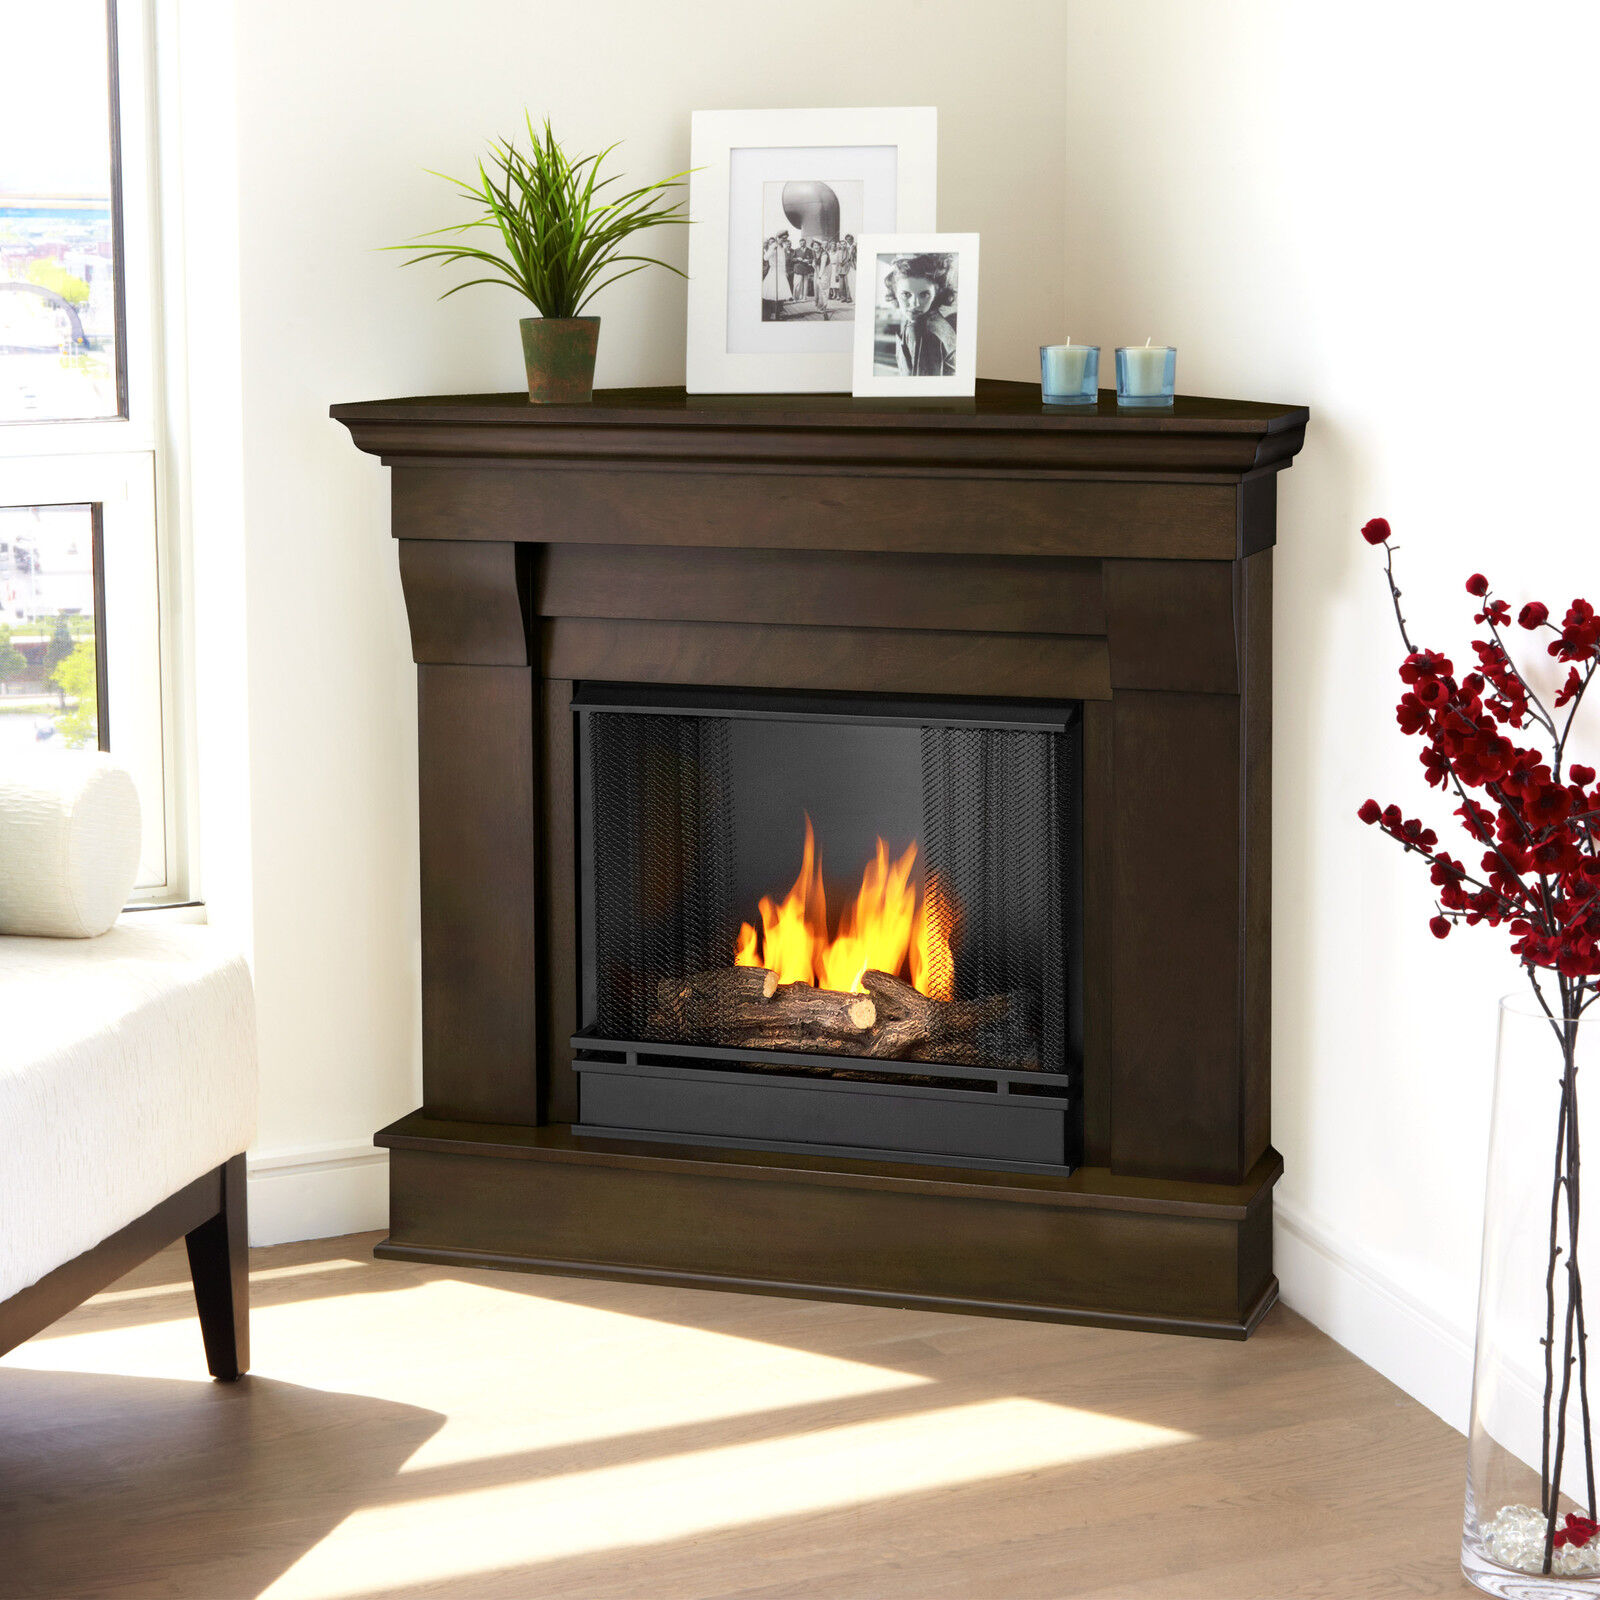 Real Flame Chateau GEL CORNER Fireplace Heater WALNUT or EXPRESSO 